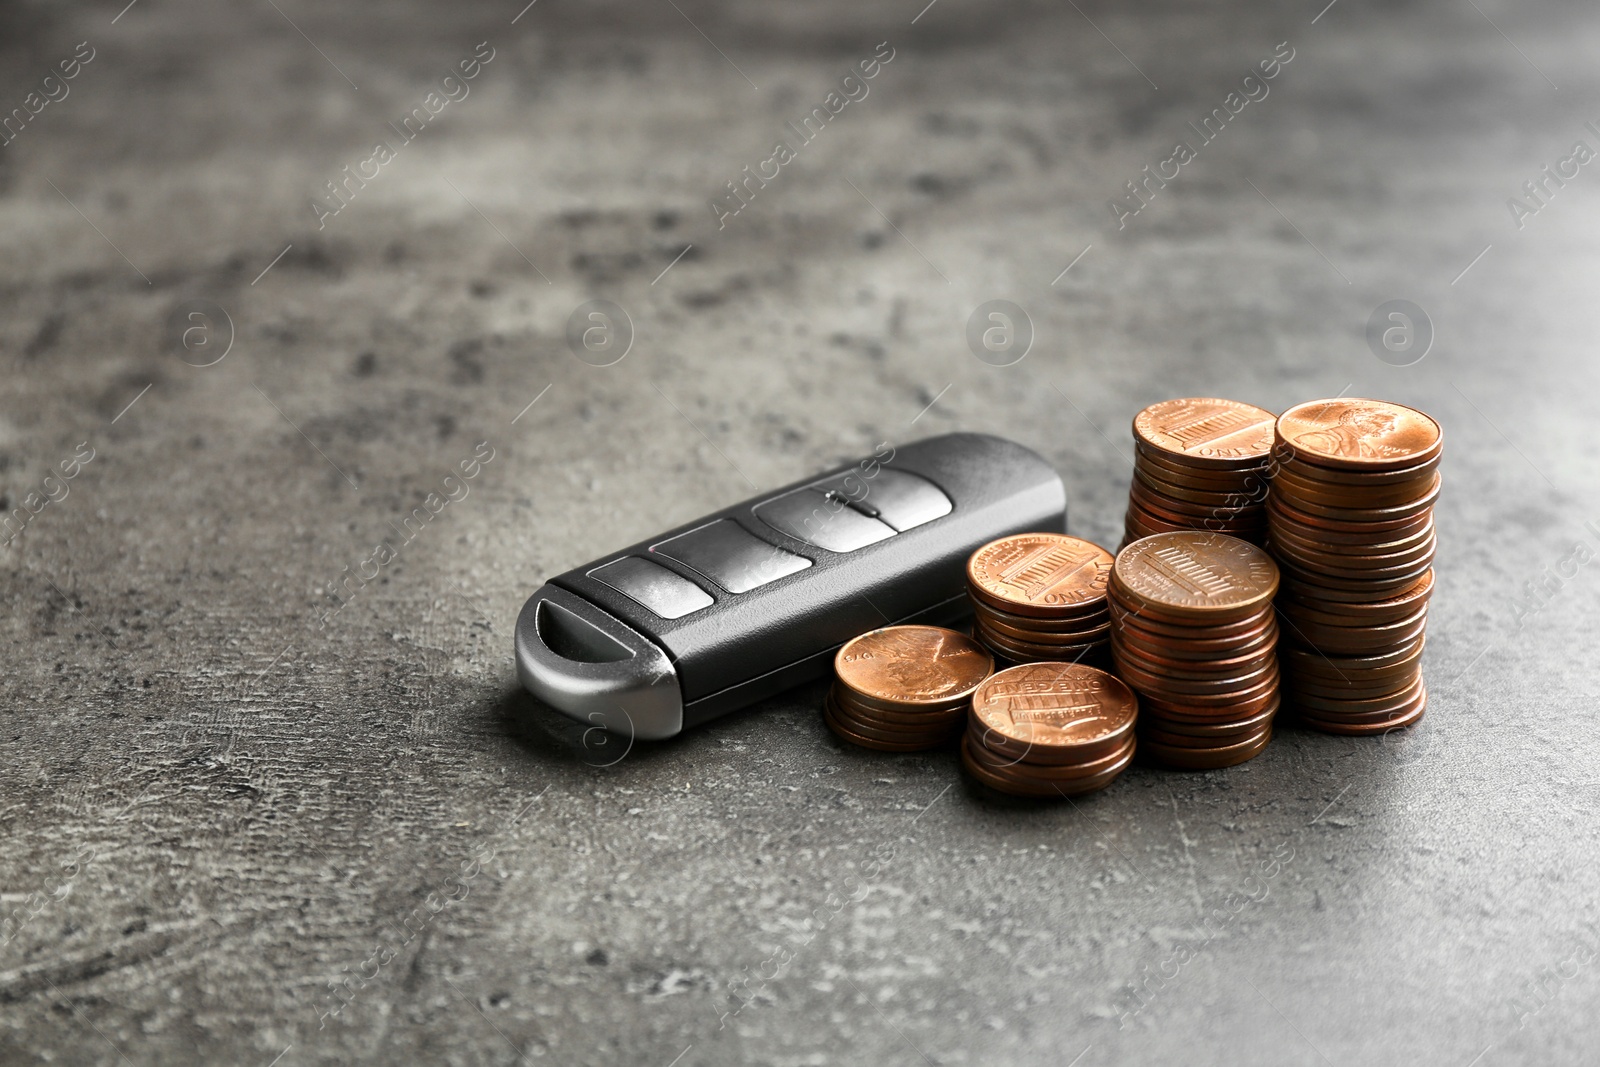 Photo of Car key and coins on grey background. Space for text